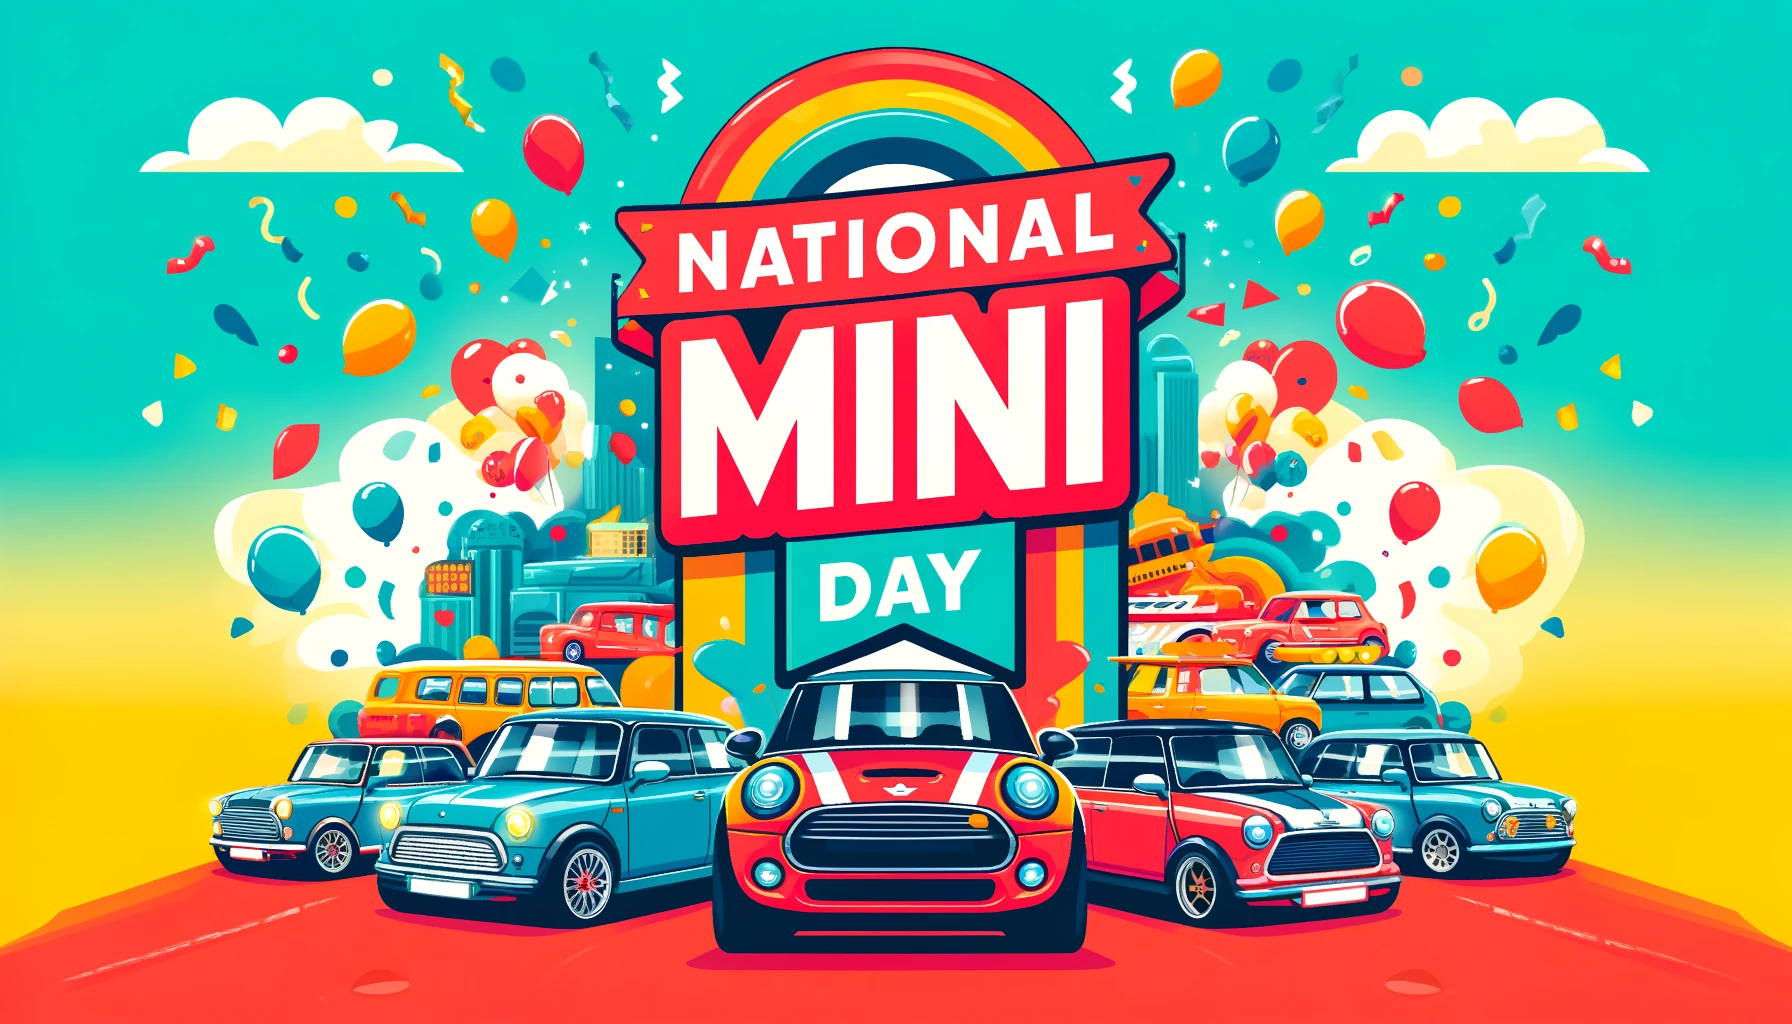 Embrace the Charm of Small Wonders on National Mini Day!